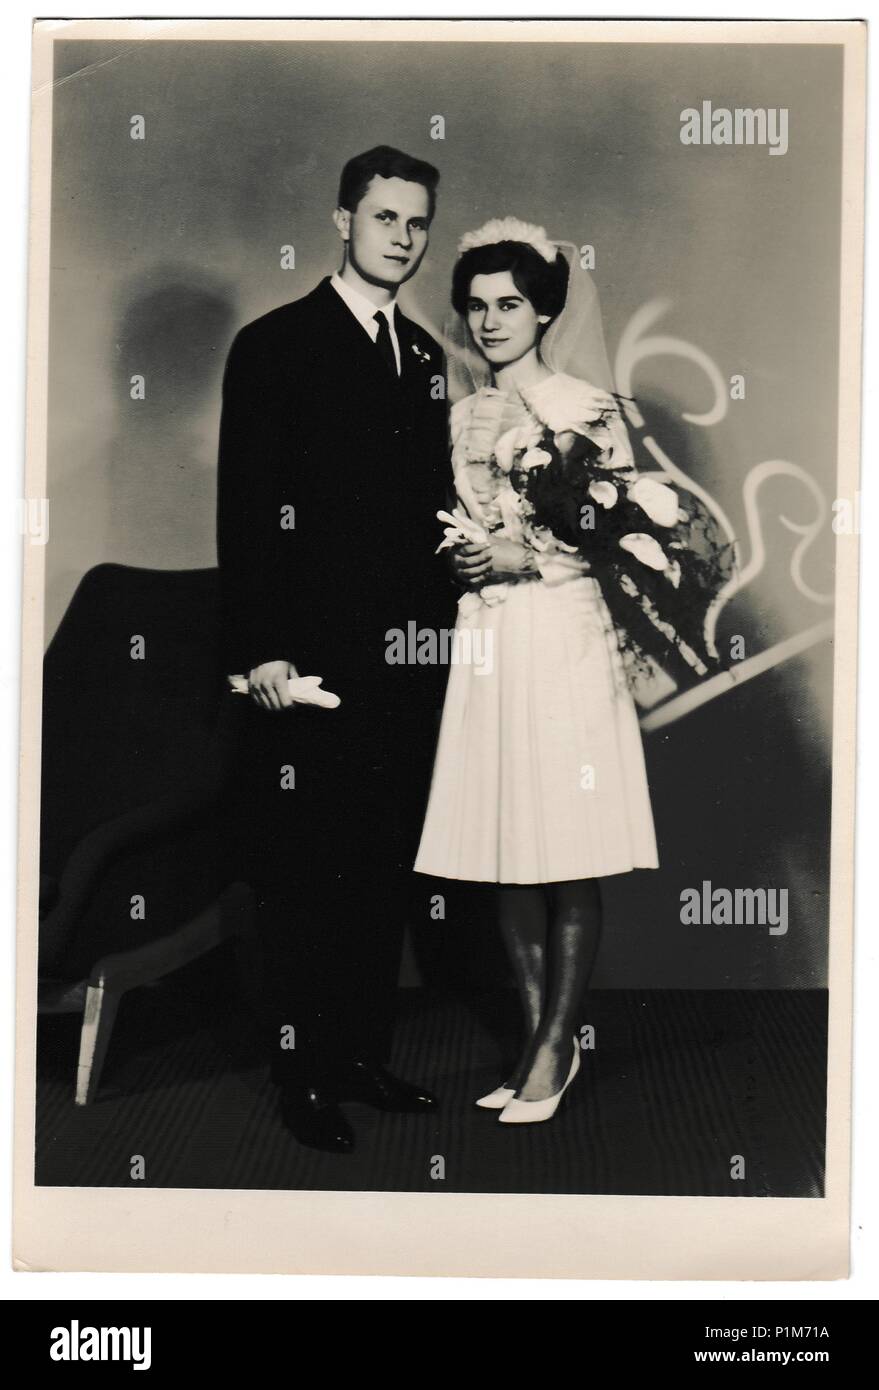 THE CZECHOSLOVAK SOCIALIST REPUBLIC - APRIL 4, 1964: Retro photo shows bride with white kala flowers and groom wears a dark suit and white gloves. Black & white vintage photography of wedding couple. Stock Photo